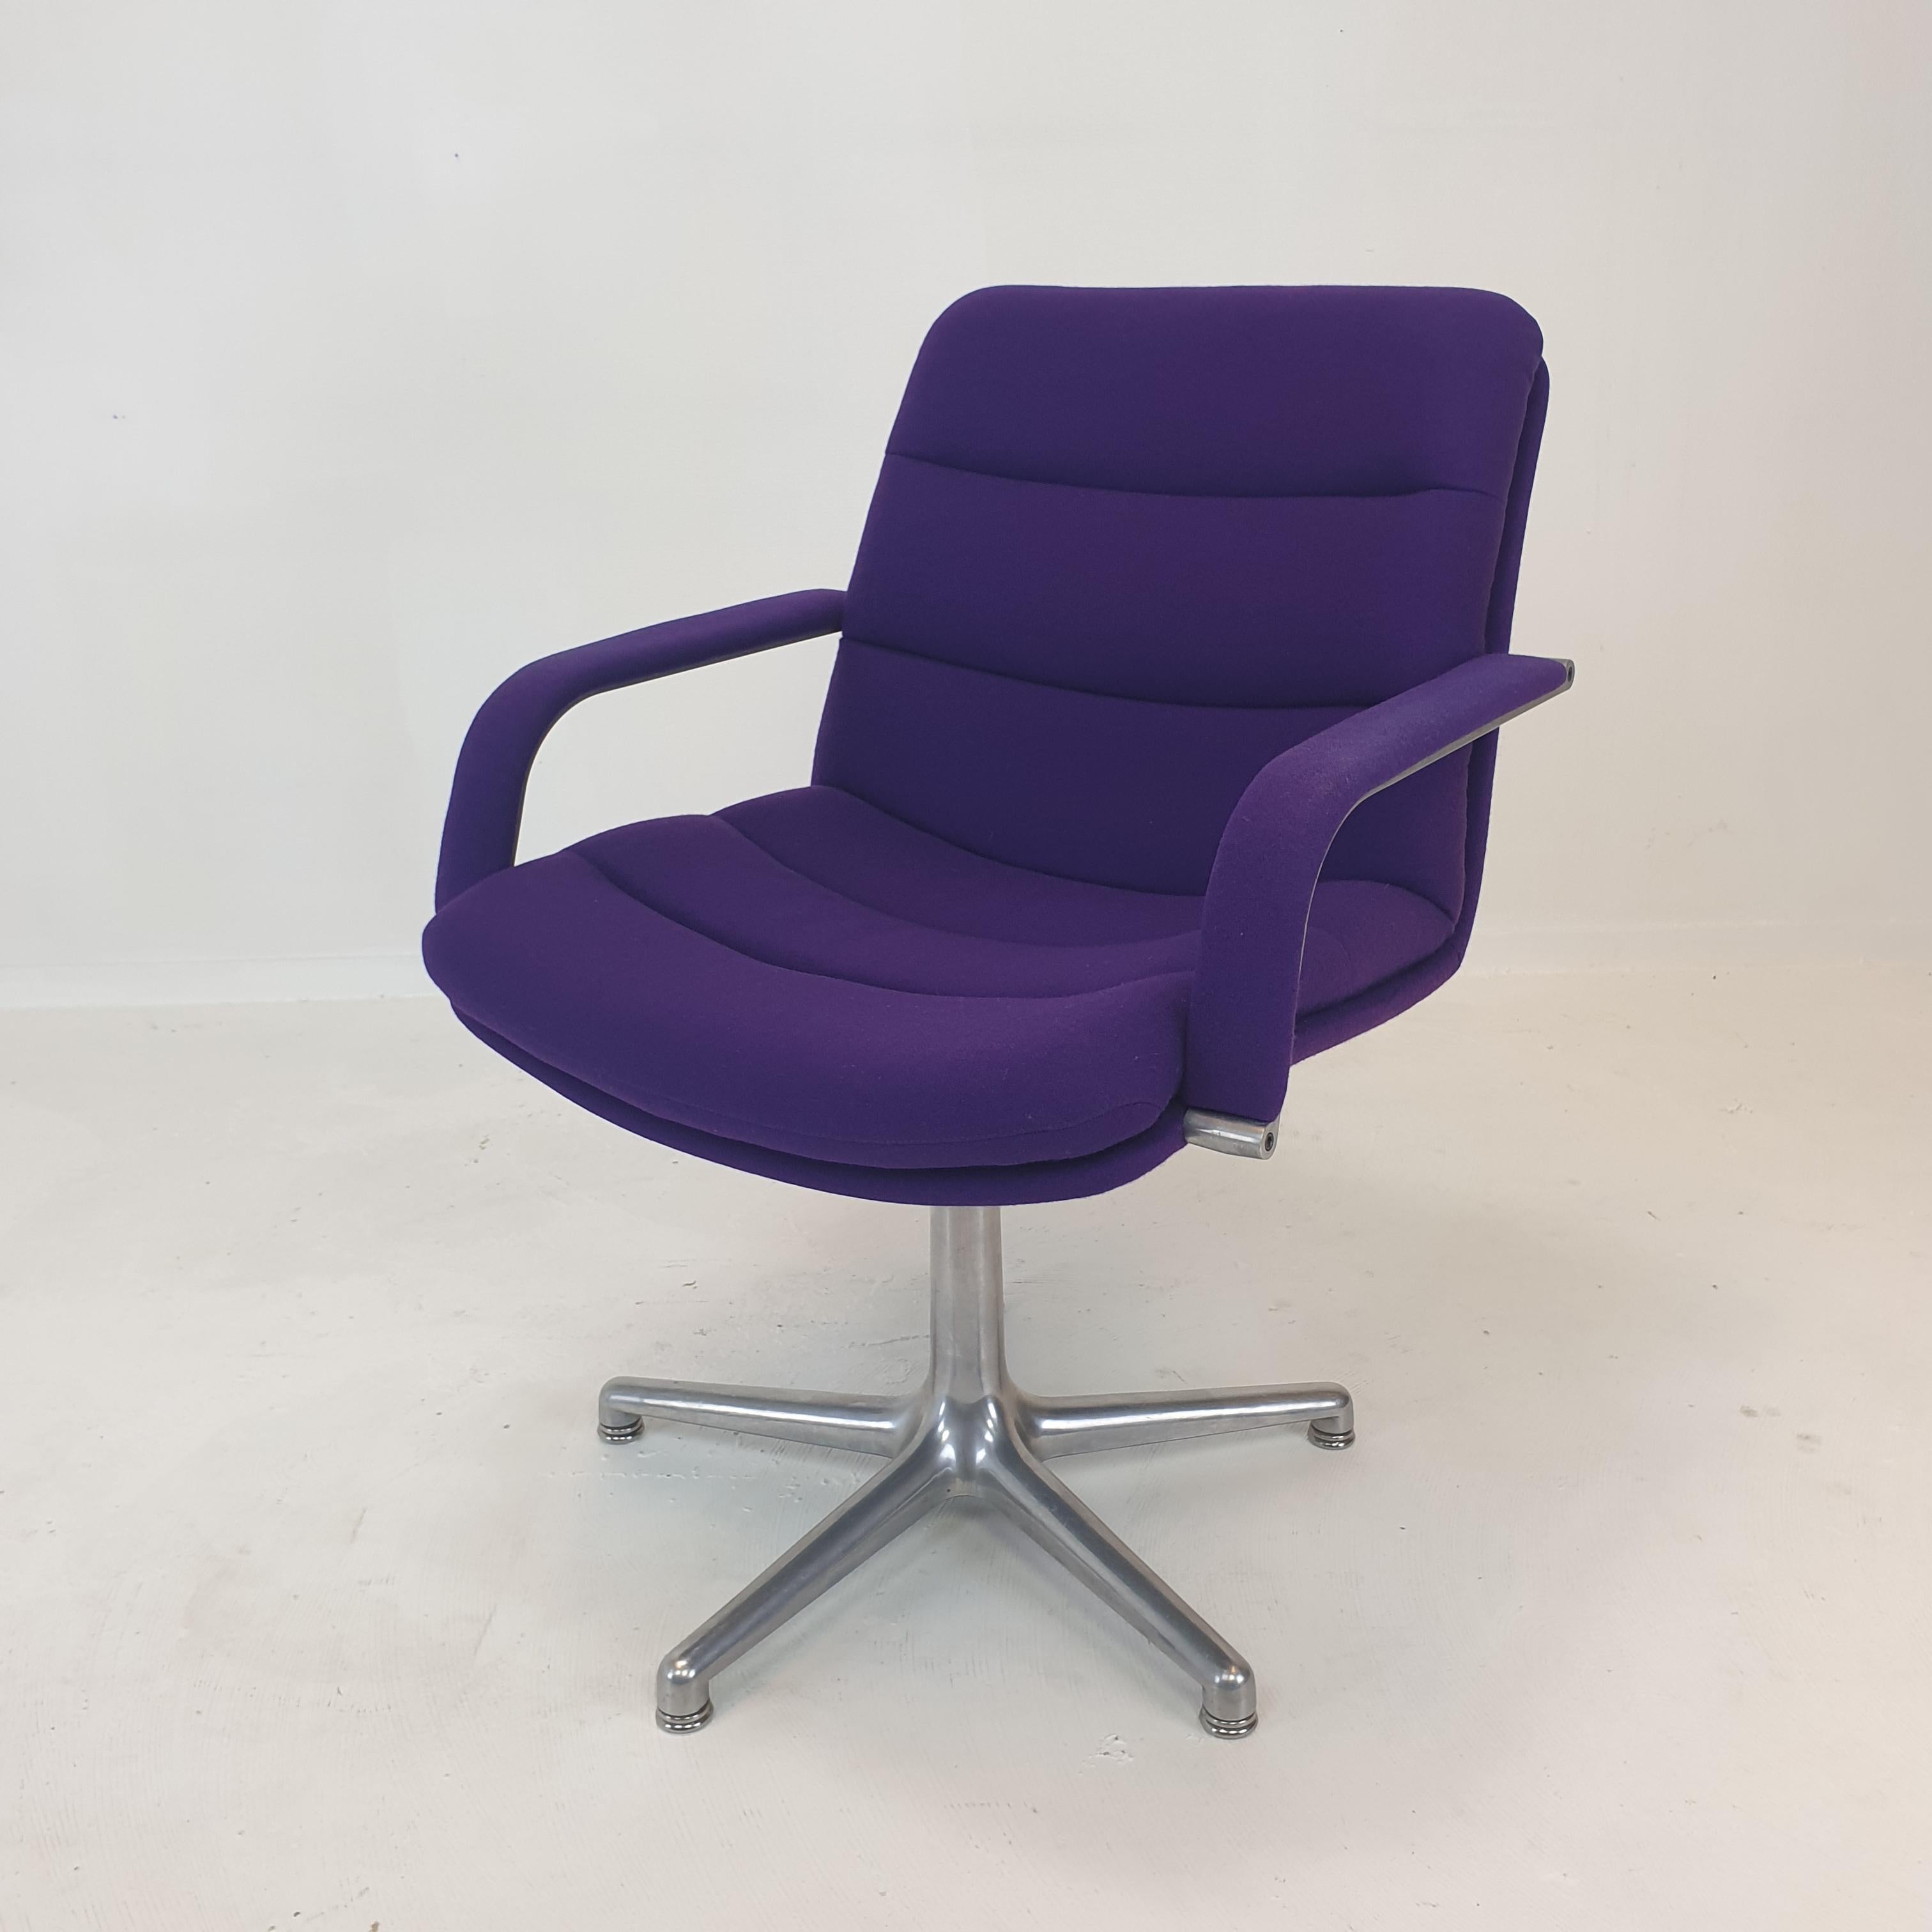 Desk or Office Chair by Geoffrey Harcourt for Artifort 1